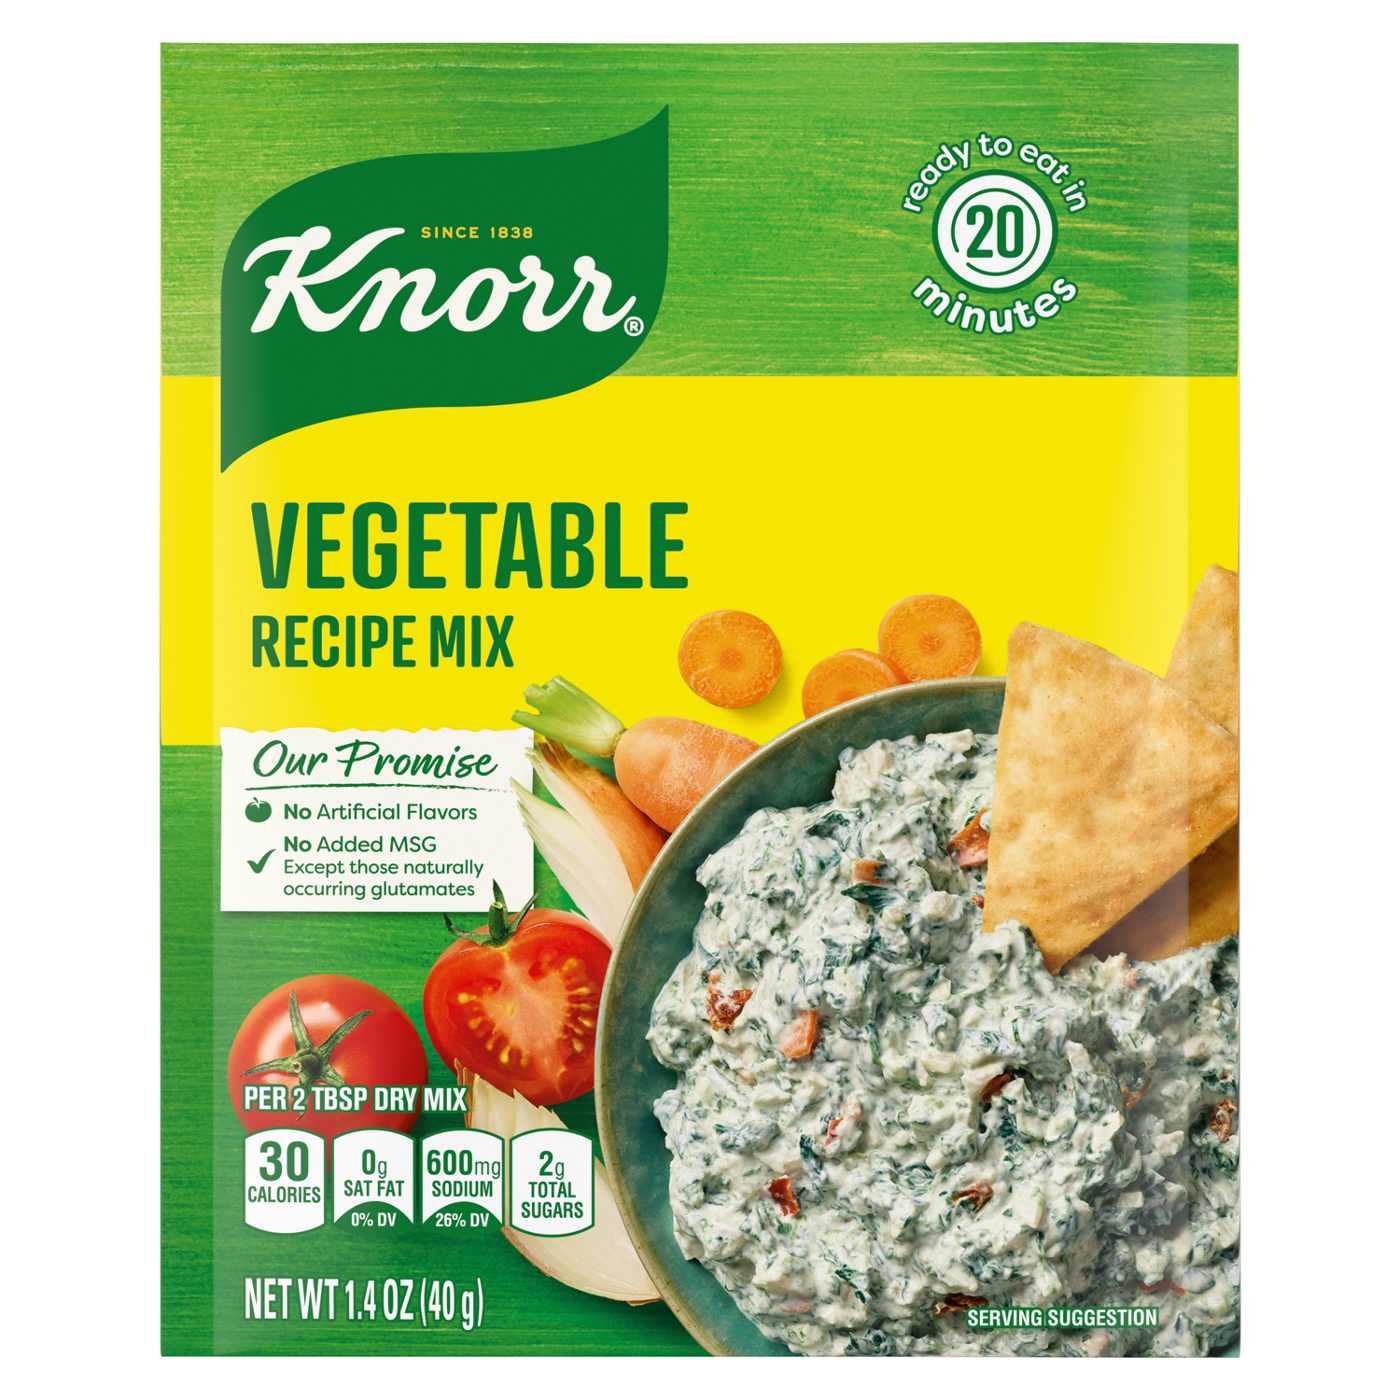 Knorr Vegetable Recipe Mix; image 1 of 7